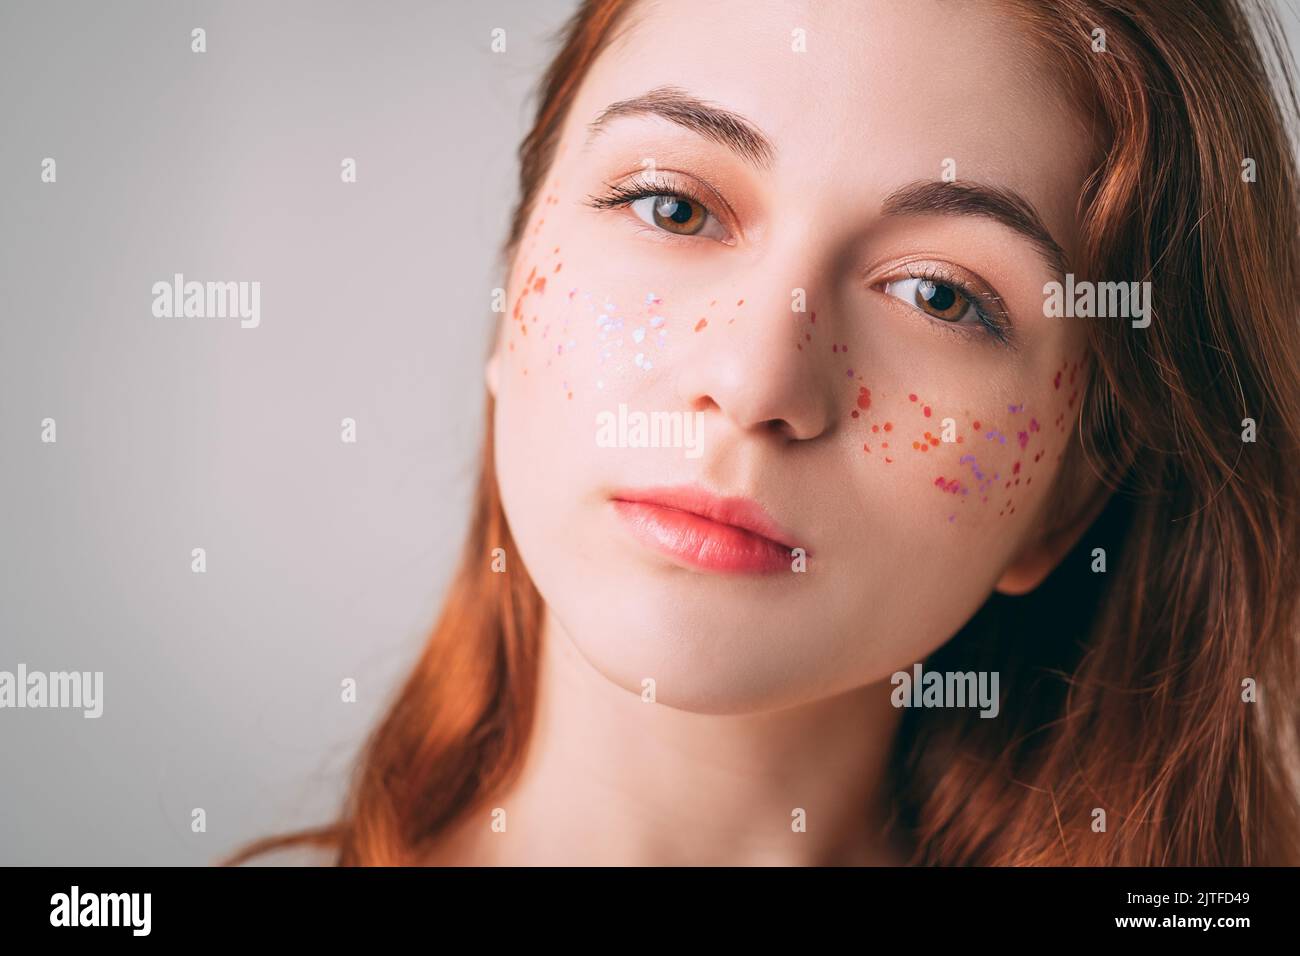 woman beauty natural makeup glitter freckles Stock Photo